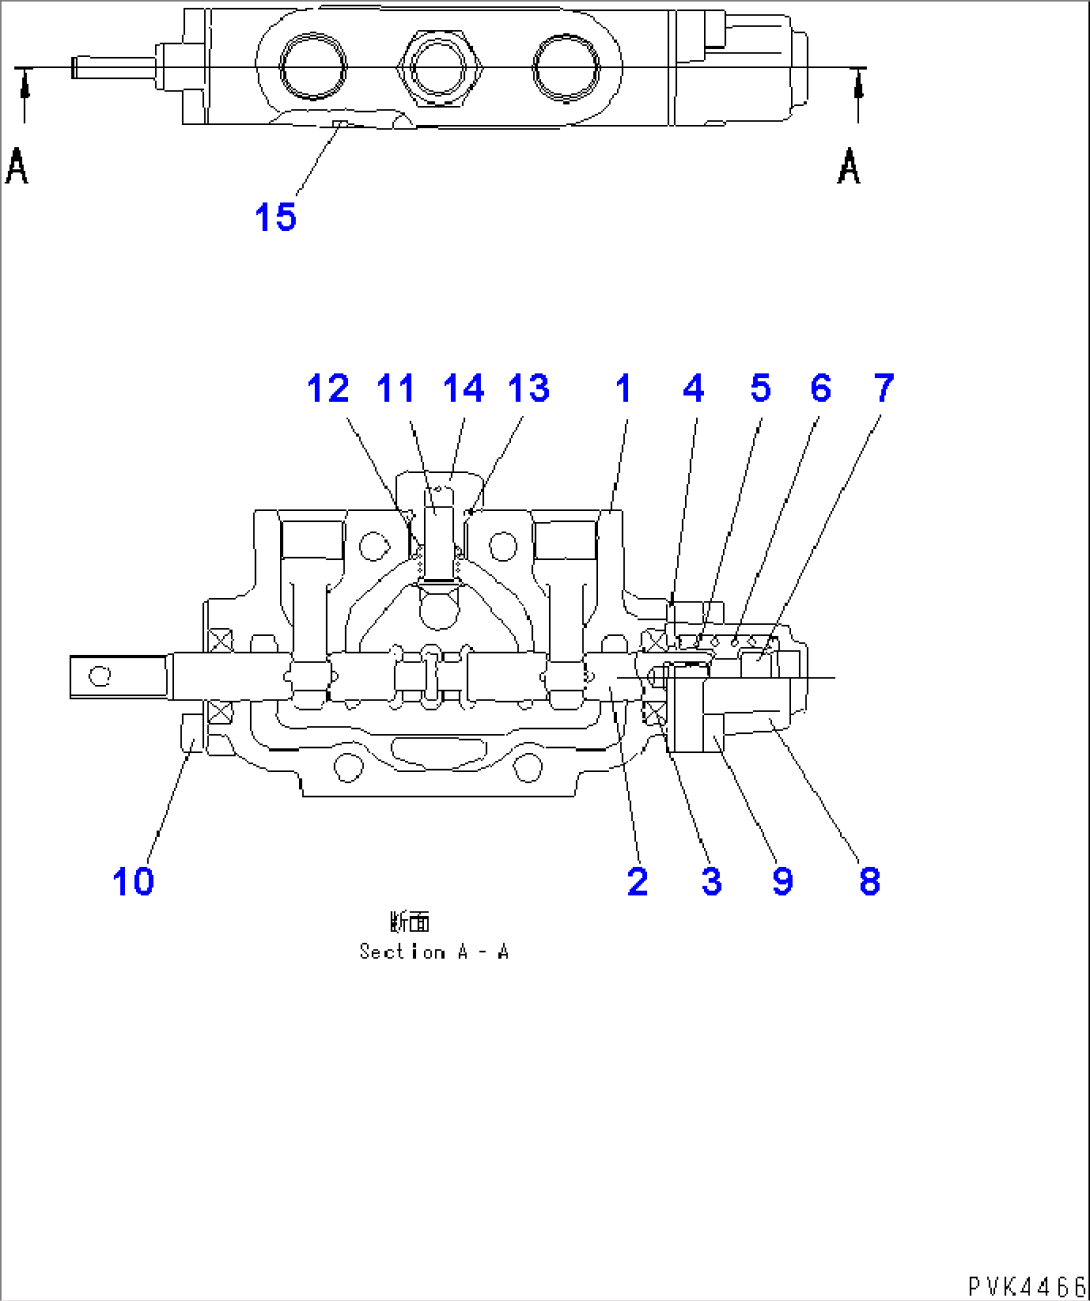 MAIN VALVE (WITH 3-POINT HITCH) (FOR TILT)